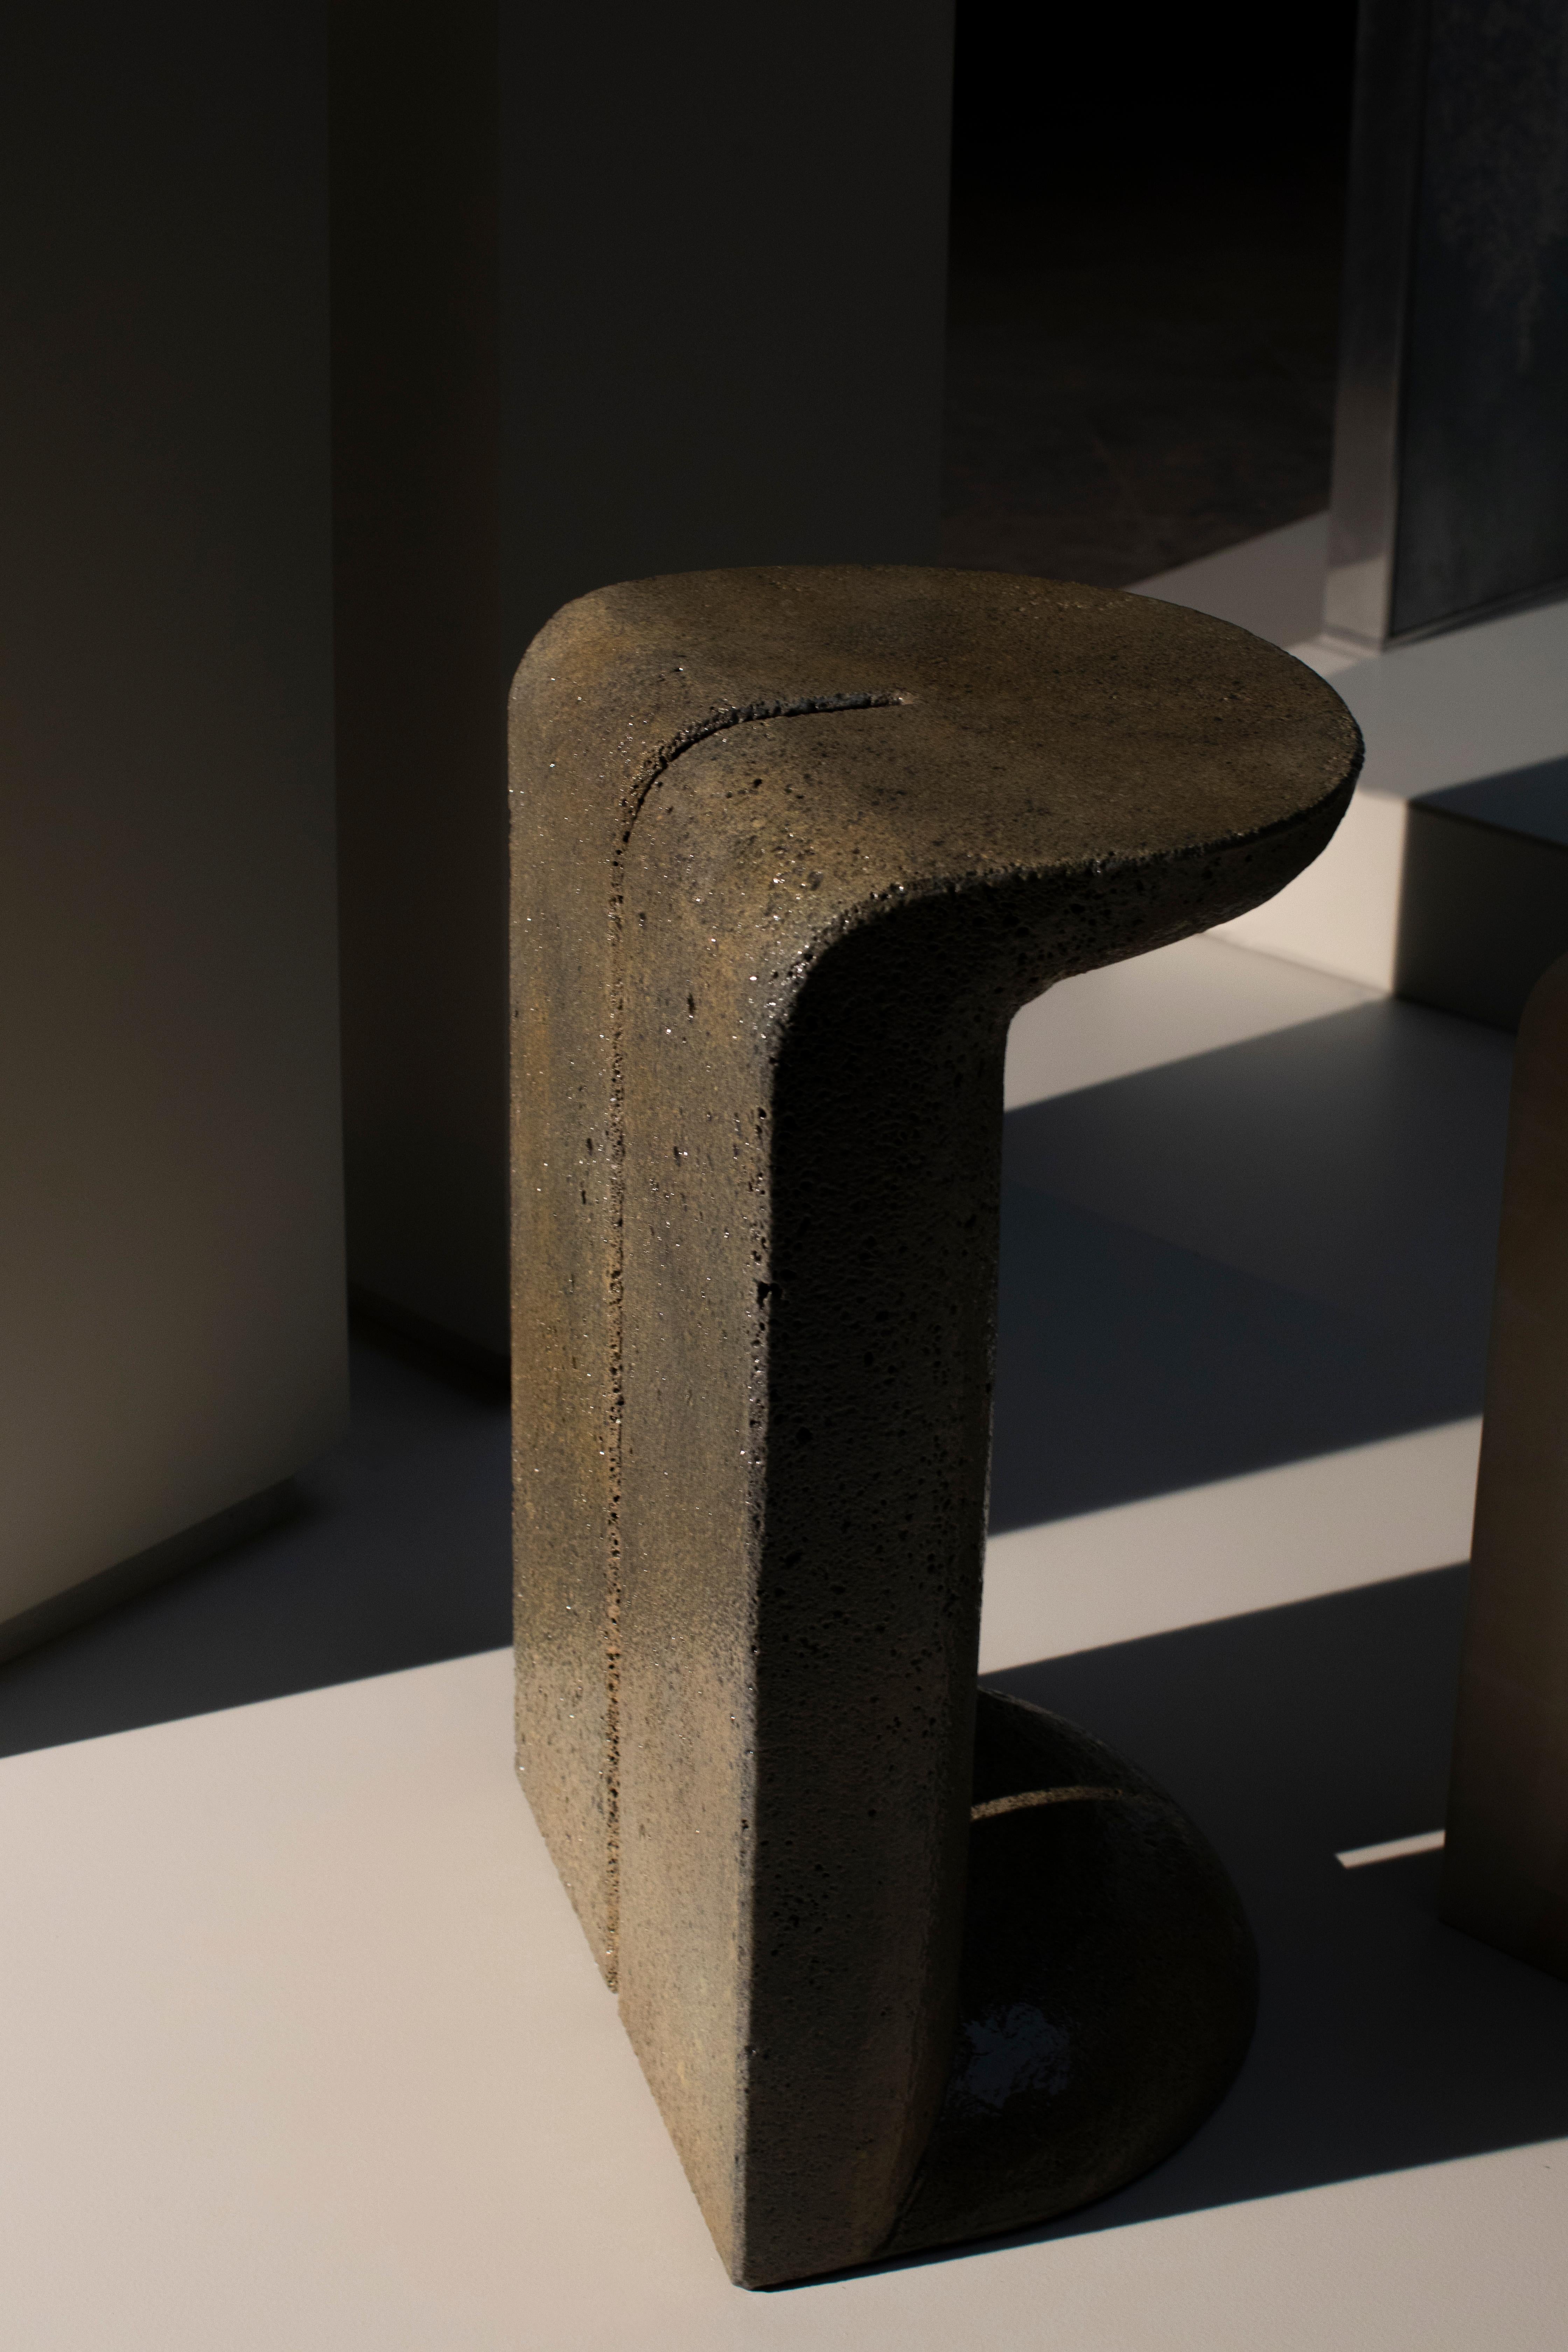 Mullunu Lava side table (2020) by Ian Felton
Lava stone, hand carved side table
40 x 33 x 66H Standard size
15.5W x 13D x 26H Standard size
Limited Edition
Edition of 15

Mullunu side table is the embodiment of those precious and unrecalled objects